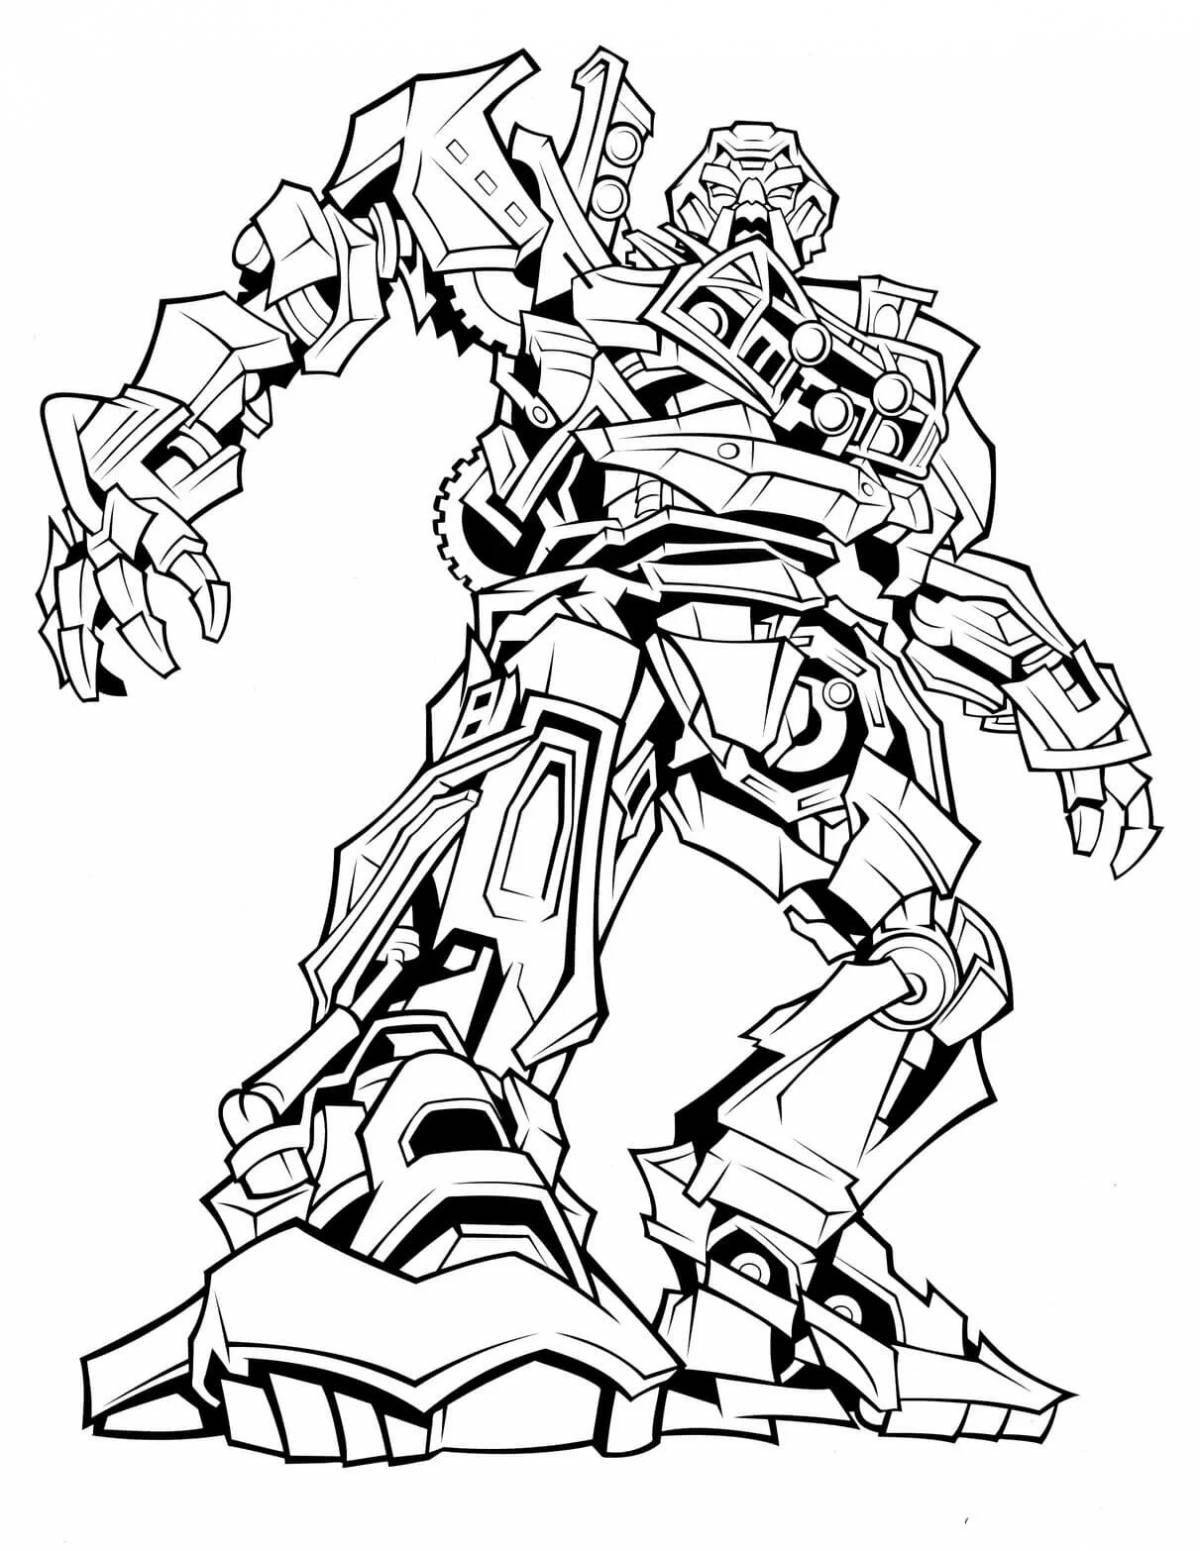 Shockwave shiny coloring page